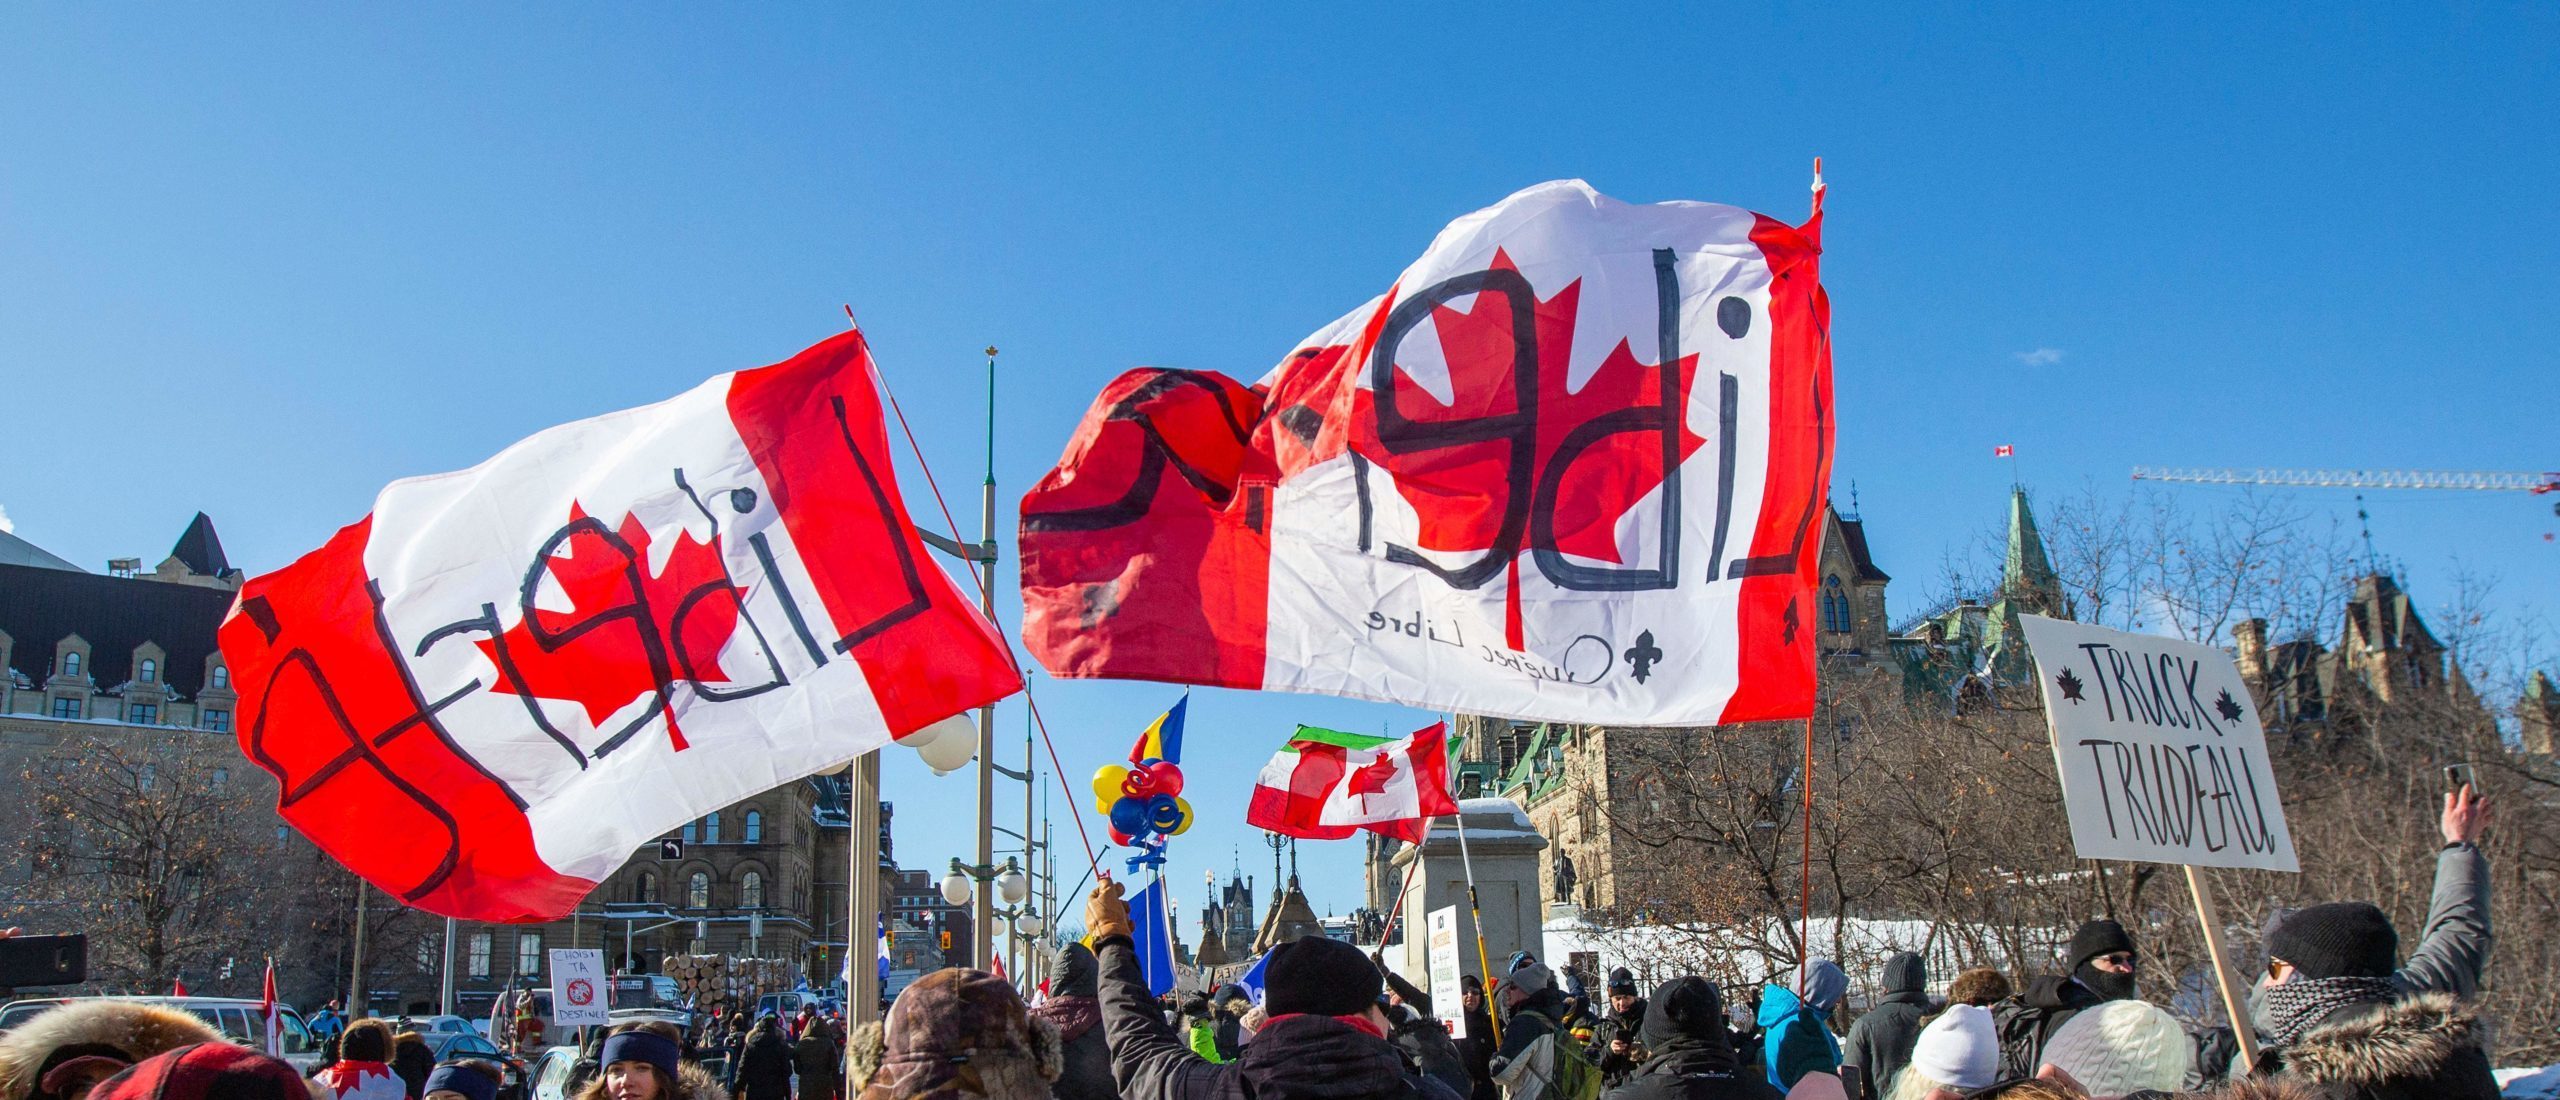 Supporters of the Freedom Convoy protest Covid-19 vaccine mandates and restrictions in front of Parliament on January 29, 2022 in Ottawa, Canada. (Photo by Lars Hagberg / AFP) (Photo by LARS HAGBERG/AFP via Getty Images)